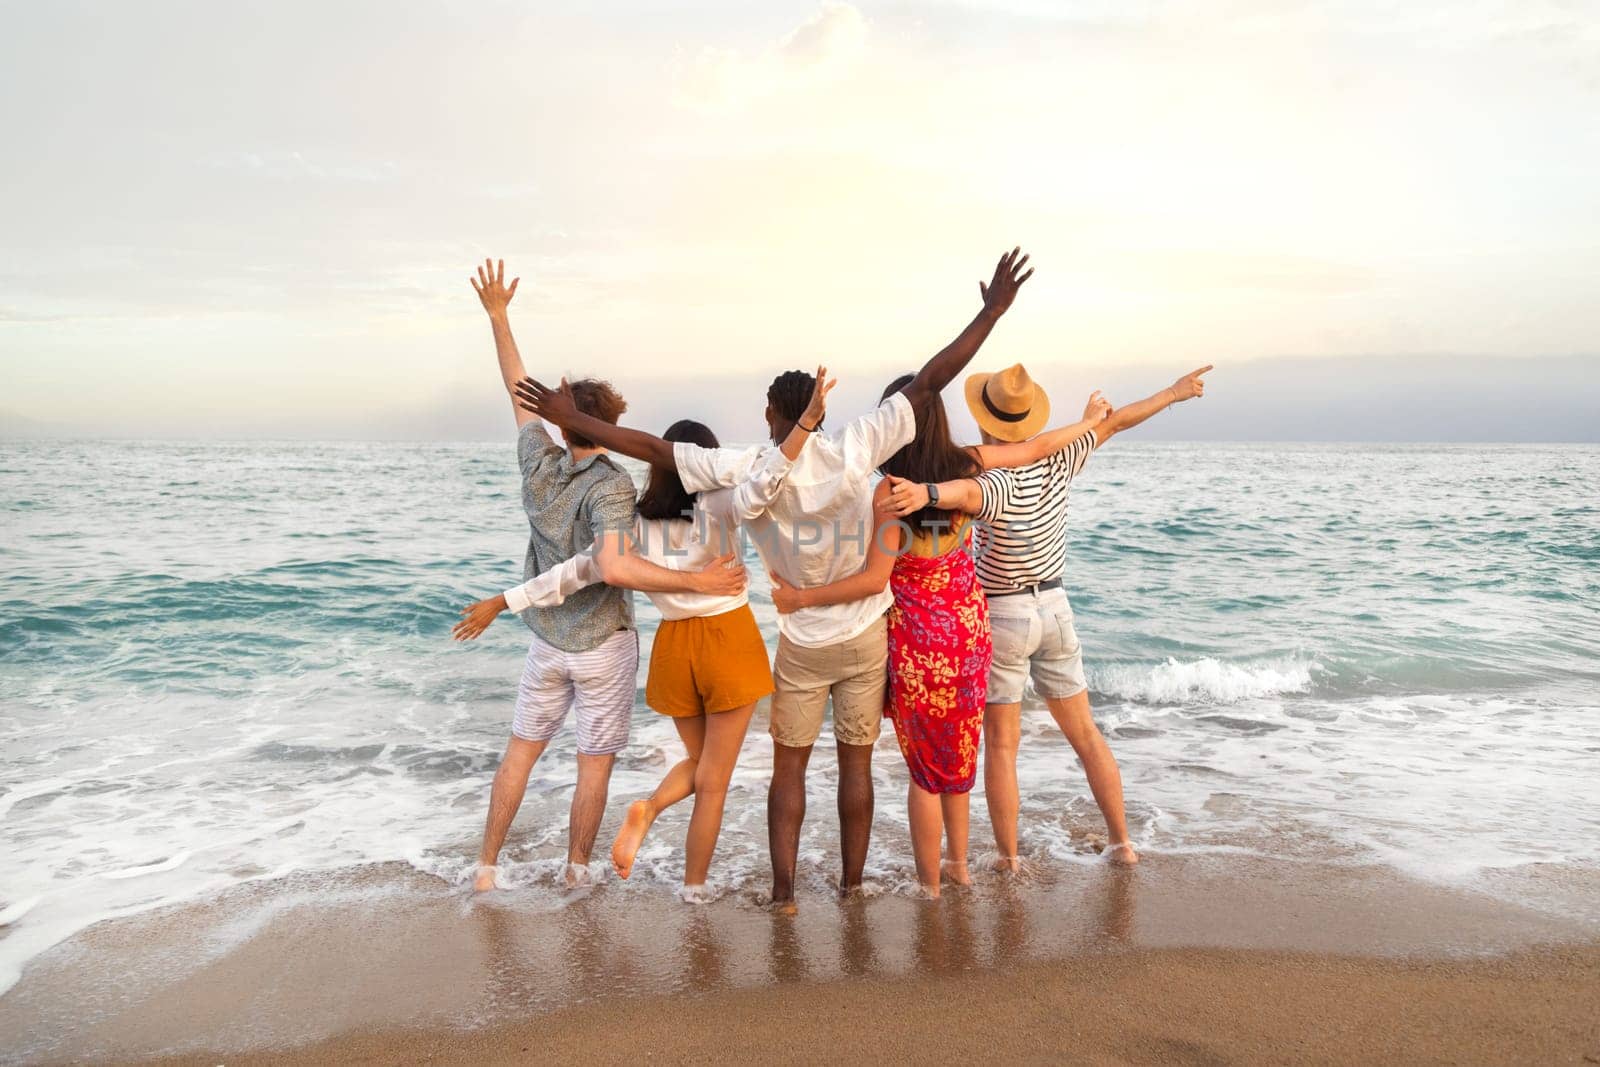 Rear view of multiracial friends embracing together looking at the ocean celebrating with arms up during vacation trip. by Hoverstock